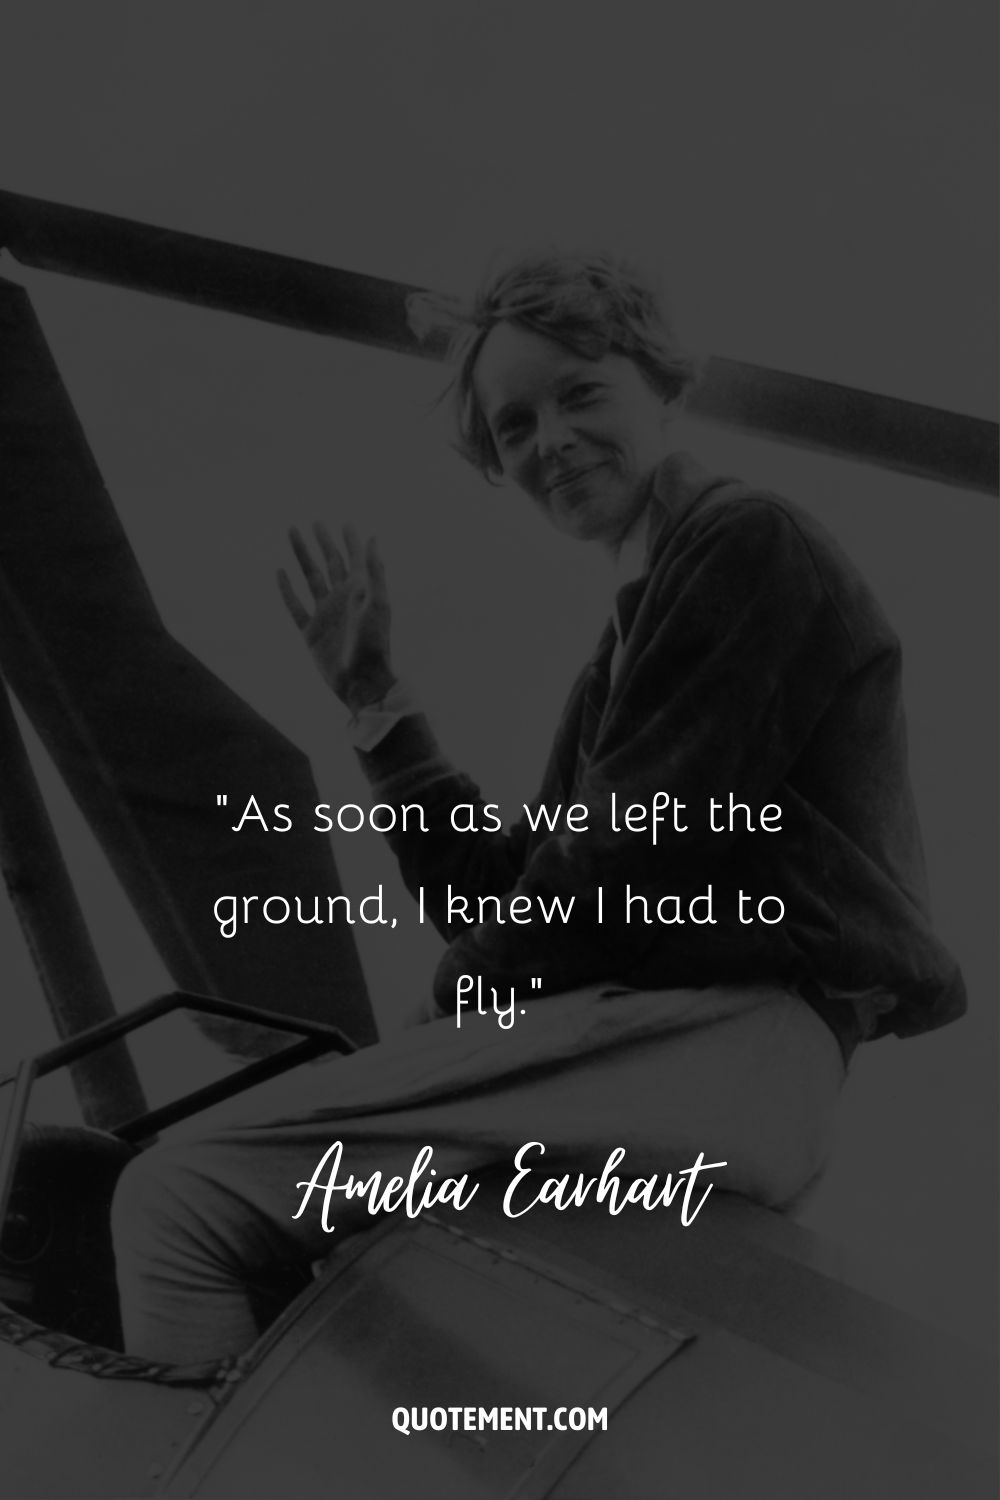 “As soon as we left the ground, I knew I had to fly.” ― Amelia Earhart